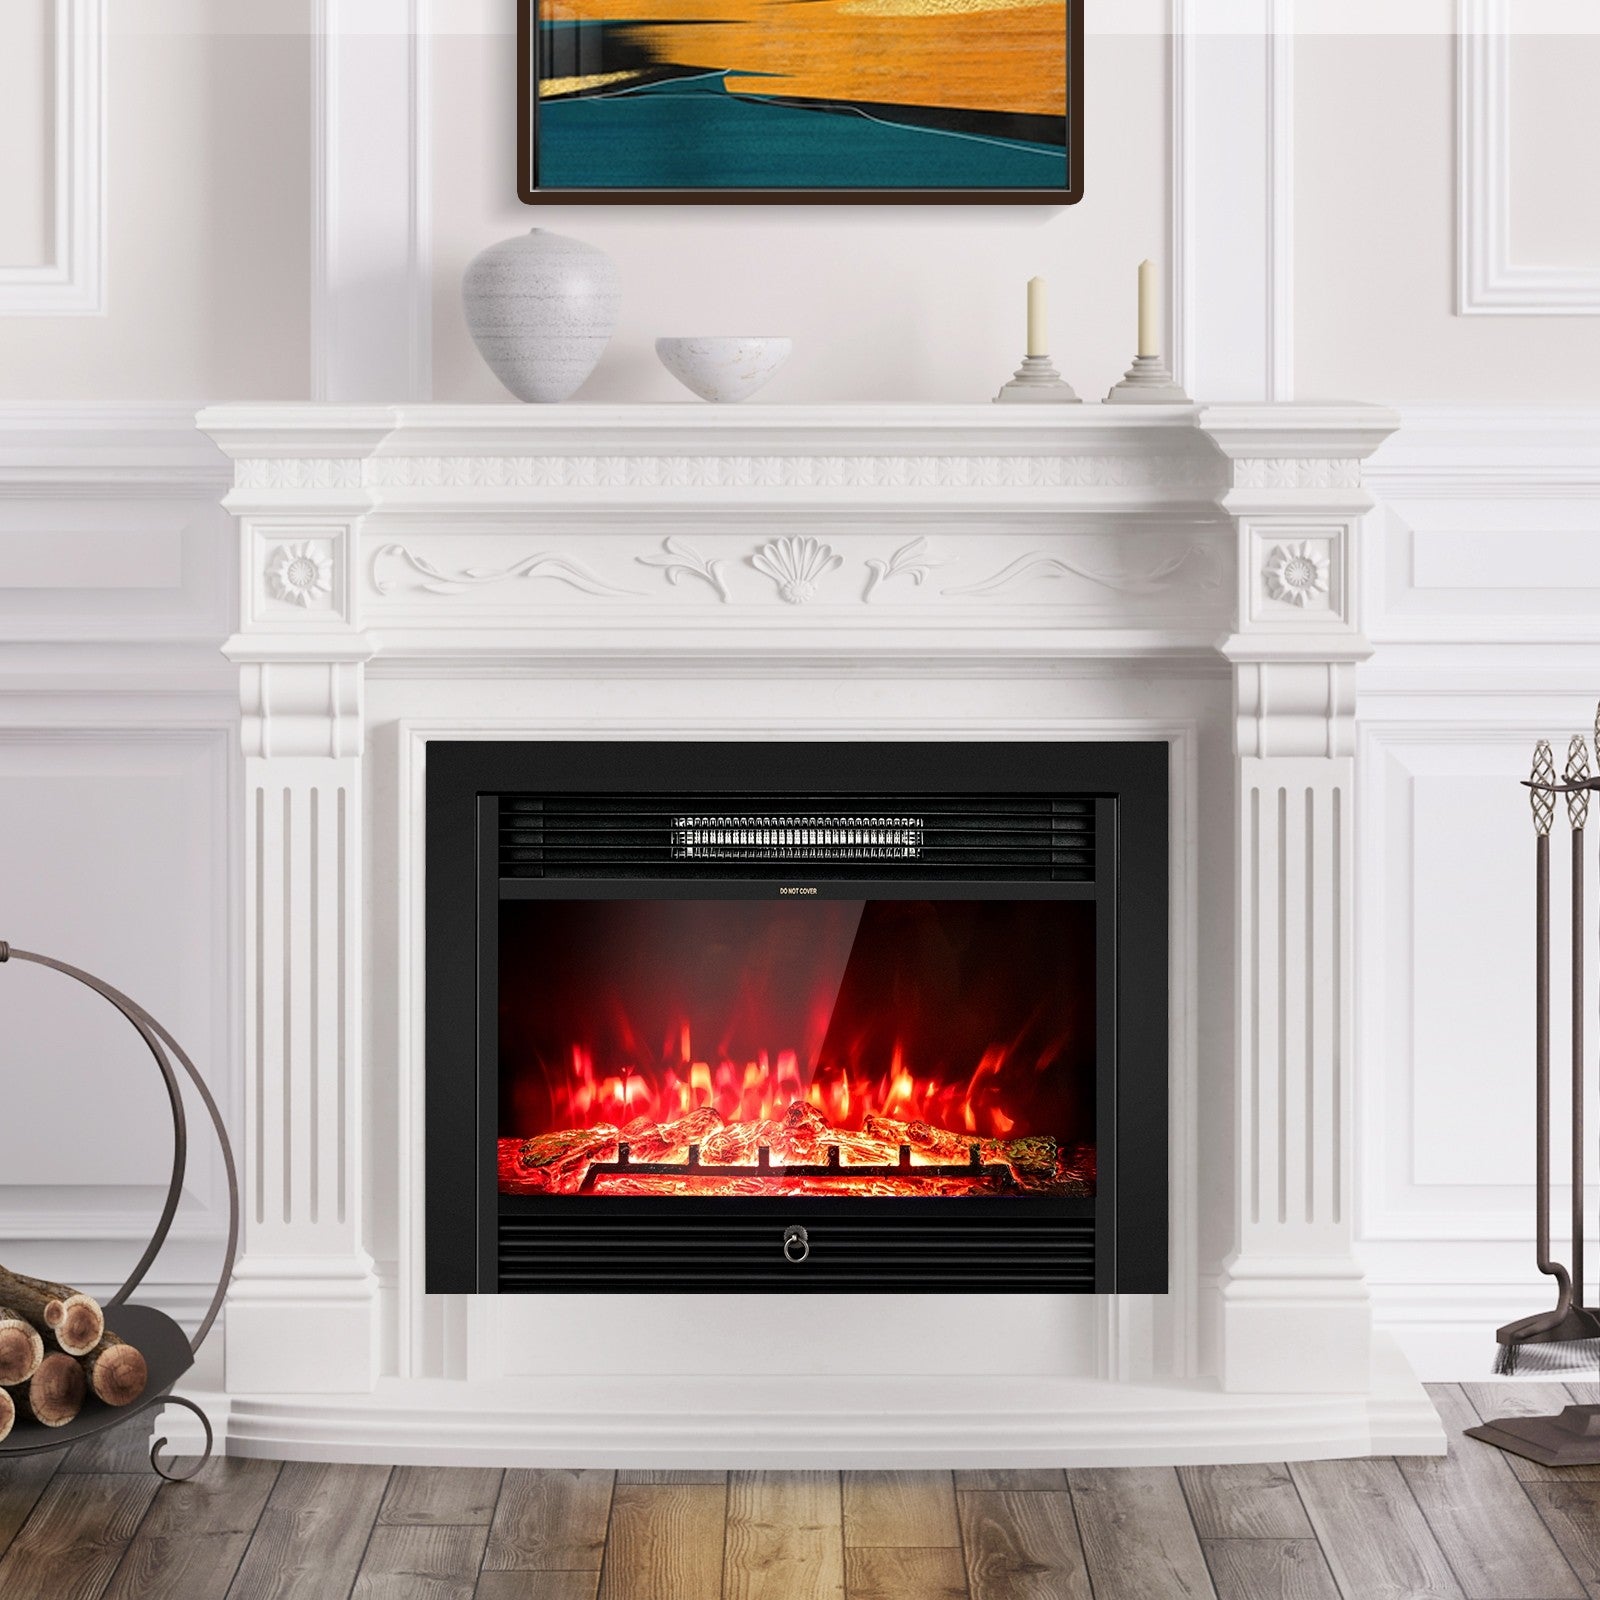 28.5 inch Recessed Mounted Standing Fireplace Heater with 3 Flame Option-Boyel Living